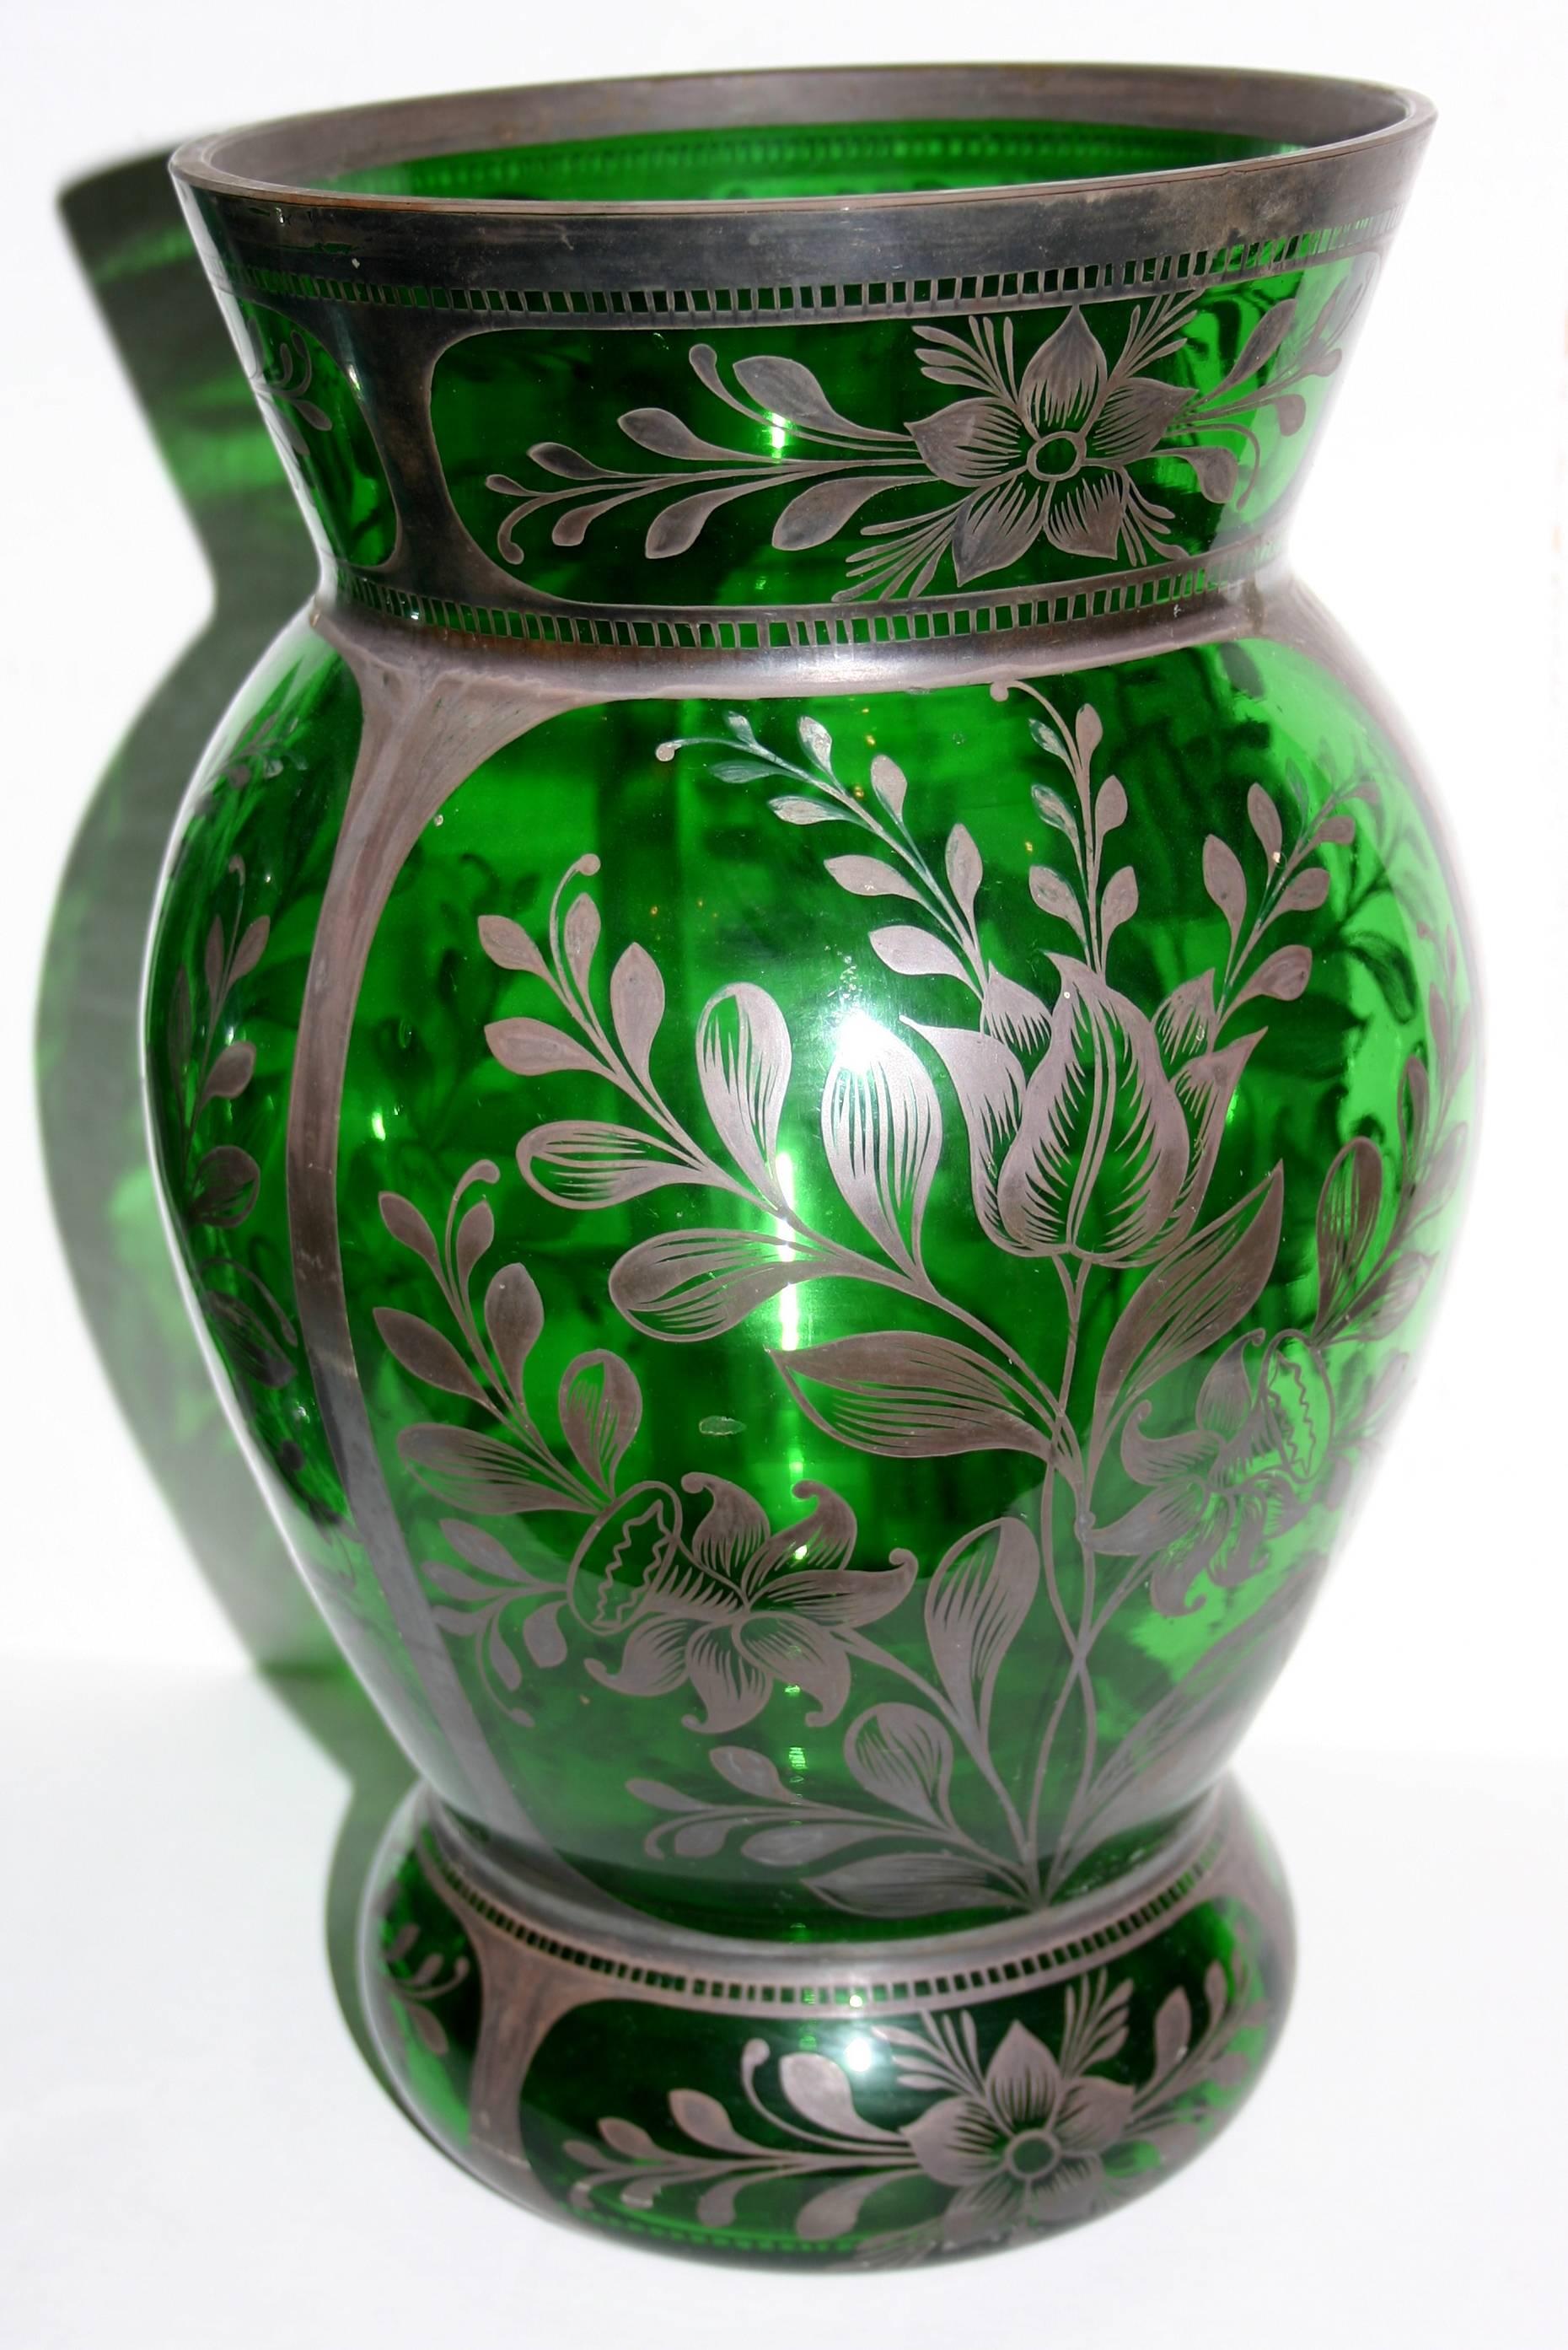 Pair of 1930s French emerald green glass vases with hand-applied silver decoration depicting foliage.

Measurements:
Height 13.25